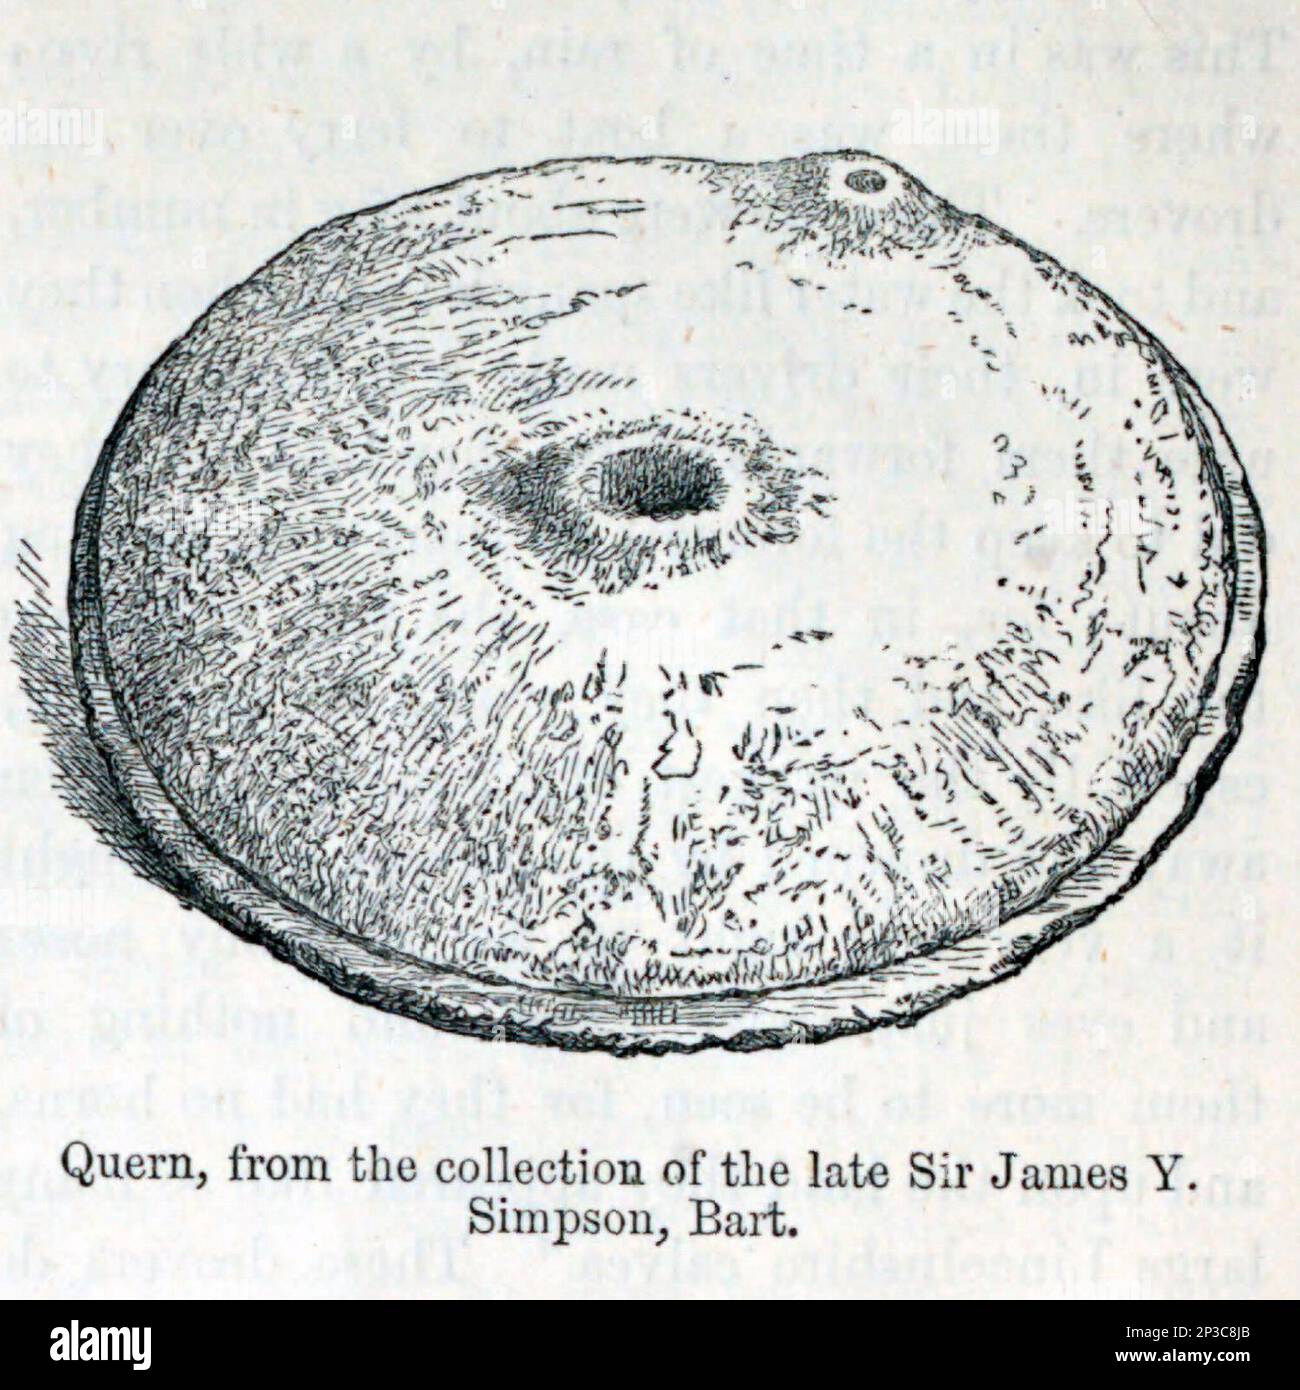 Quern-stones are stone tools for hand-grinding a wide variety of materials. They are used in pairs. The lower stationary stone of early examples is called a saddle quern, while the upper mobile stone is called a muller, rubber or handstone from the book ' A history of the Scottish Highlands, Highland clans and Highland regiments ' Volume 2 by Maclauchlan, Thomas, 1816-1886; Wilson, John, 1785-1854; Keltie, John Scott, Sir, 1840-1927 Publication date 1875 publisher Edinburgh ; London : A. Fullarton Stock Photo